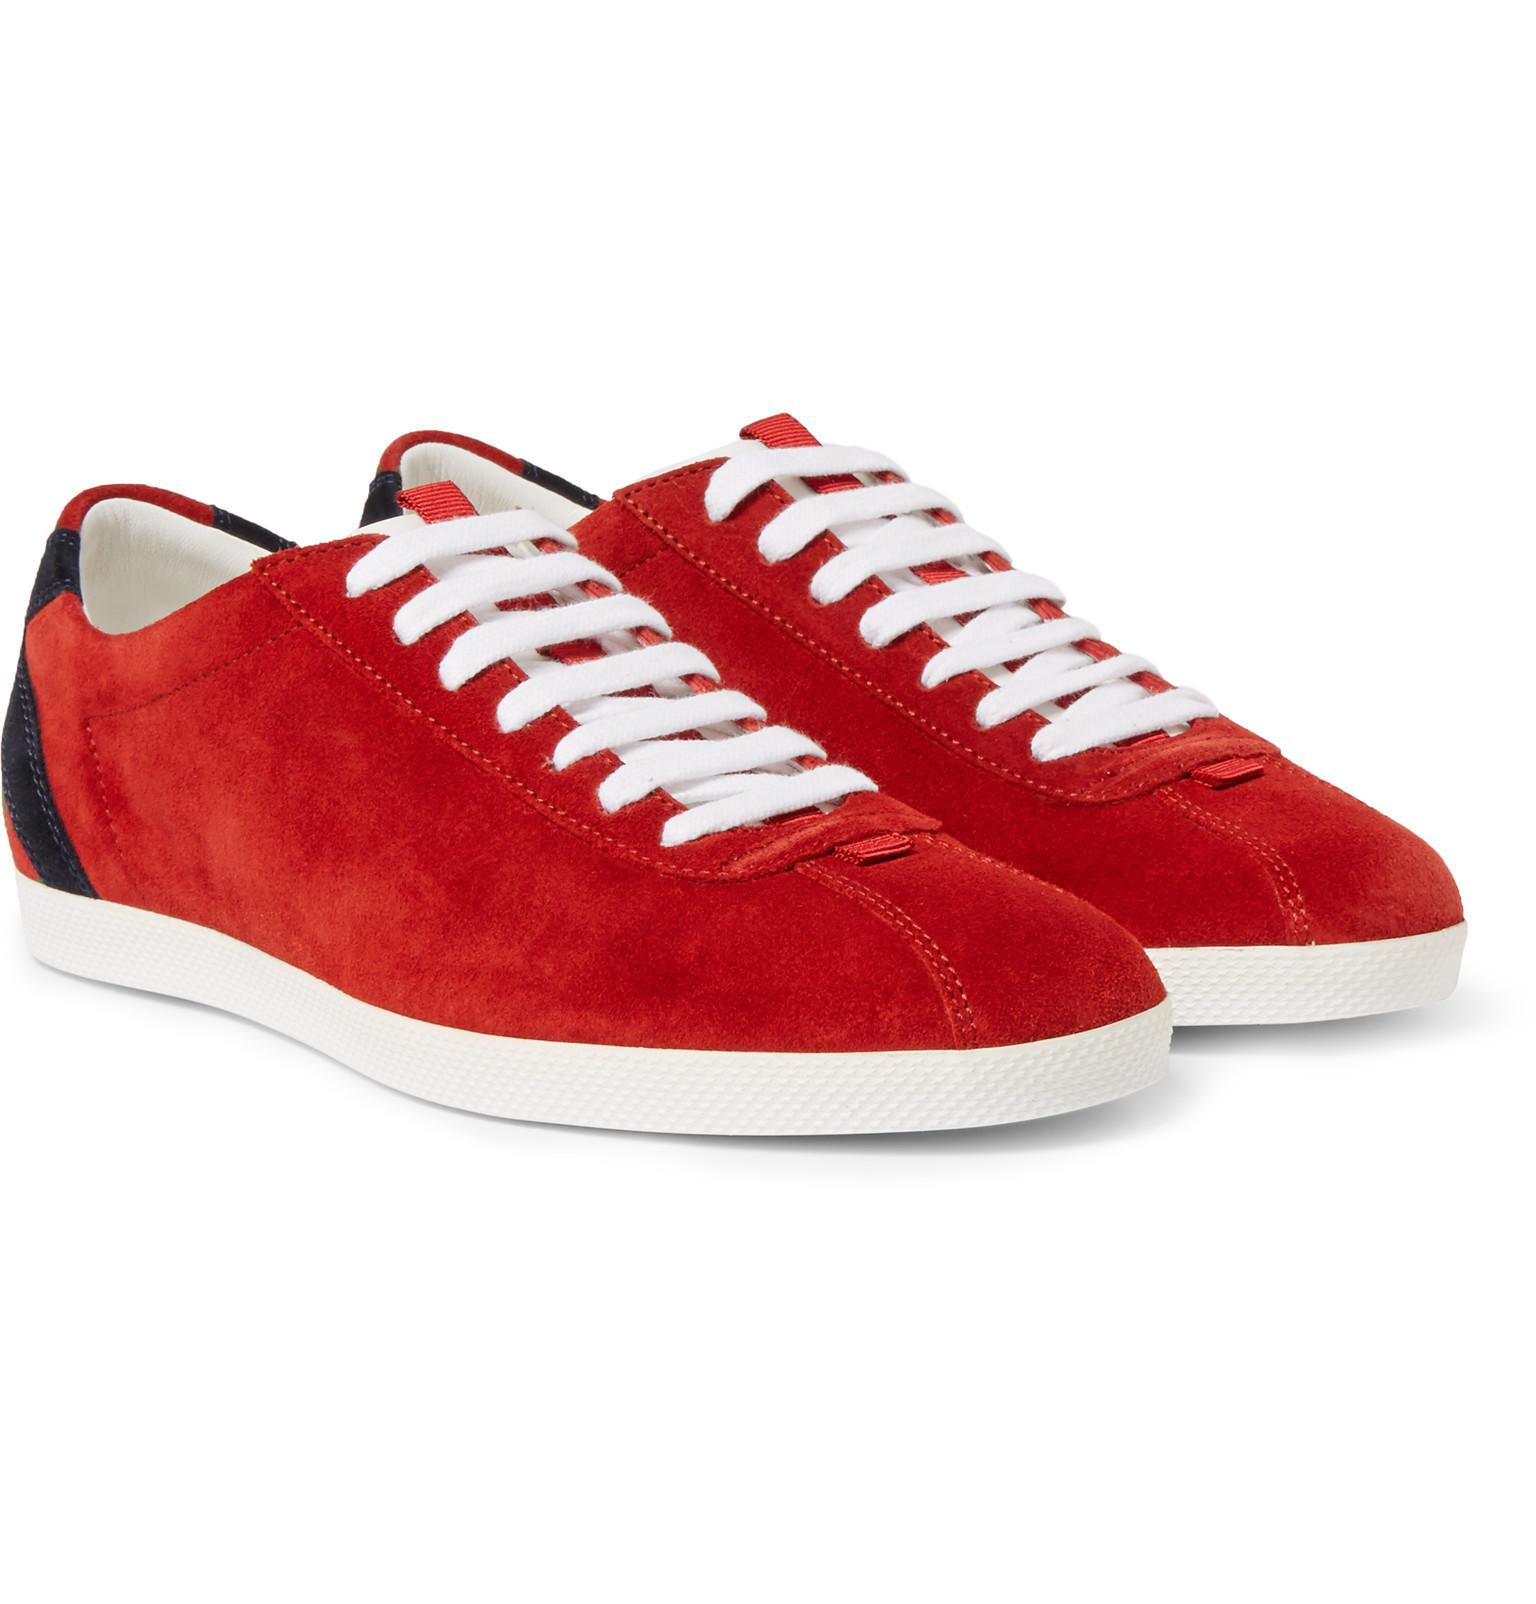 Lyst Gucci Suede Tennis Sneakers in Red for Men